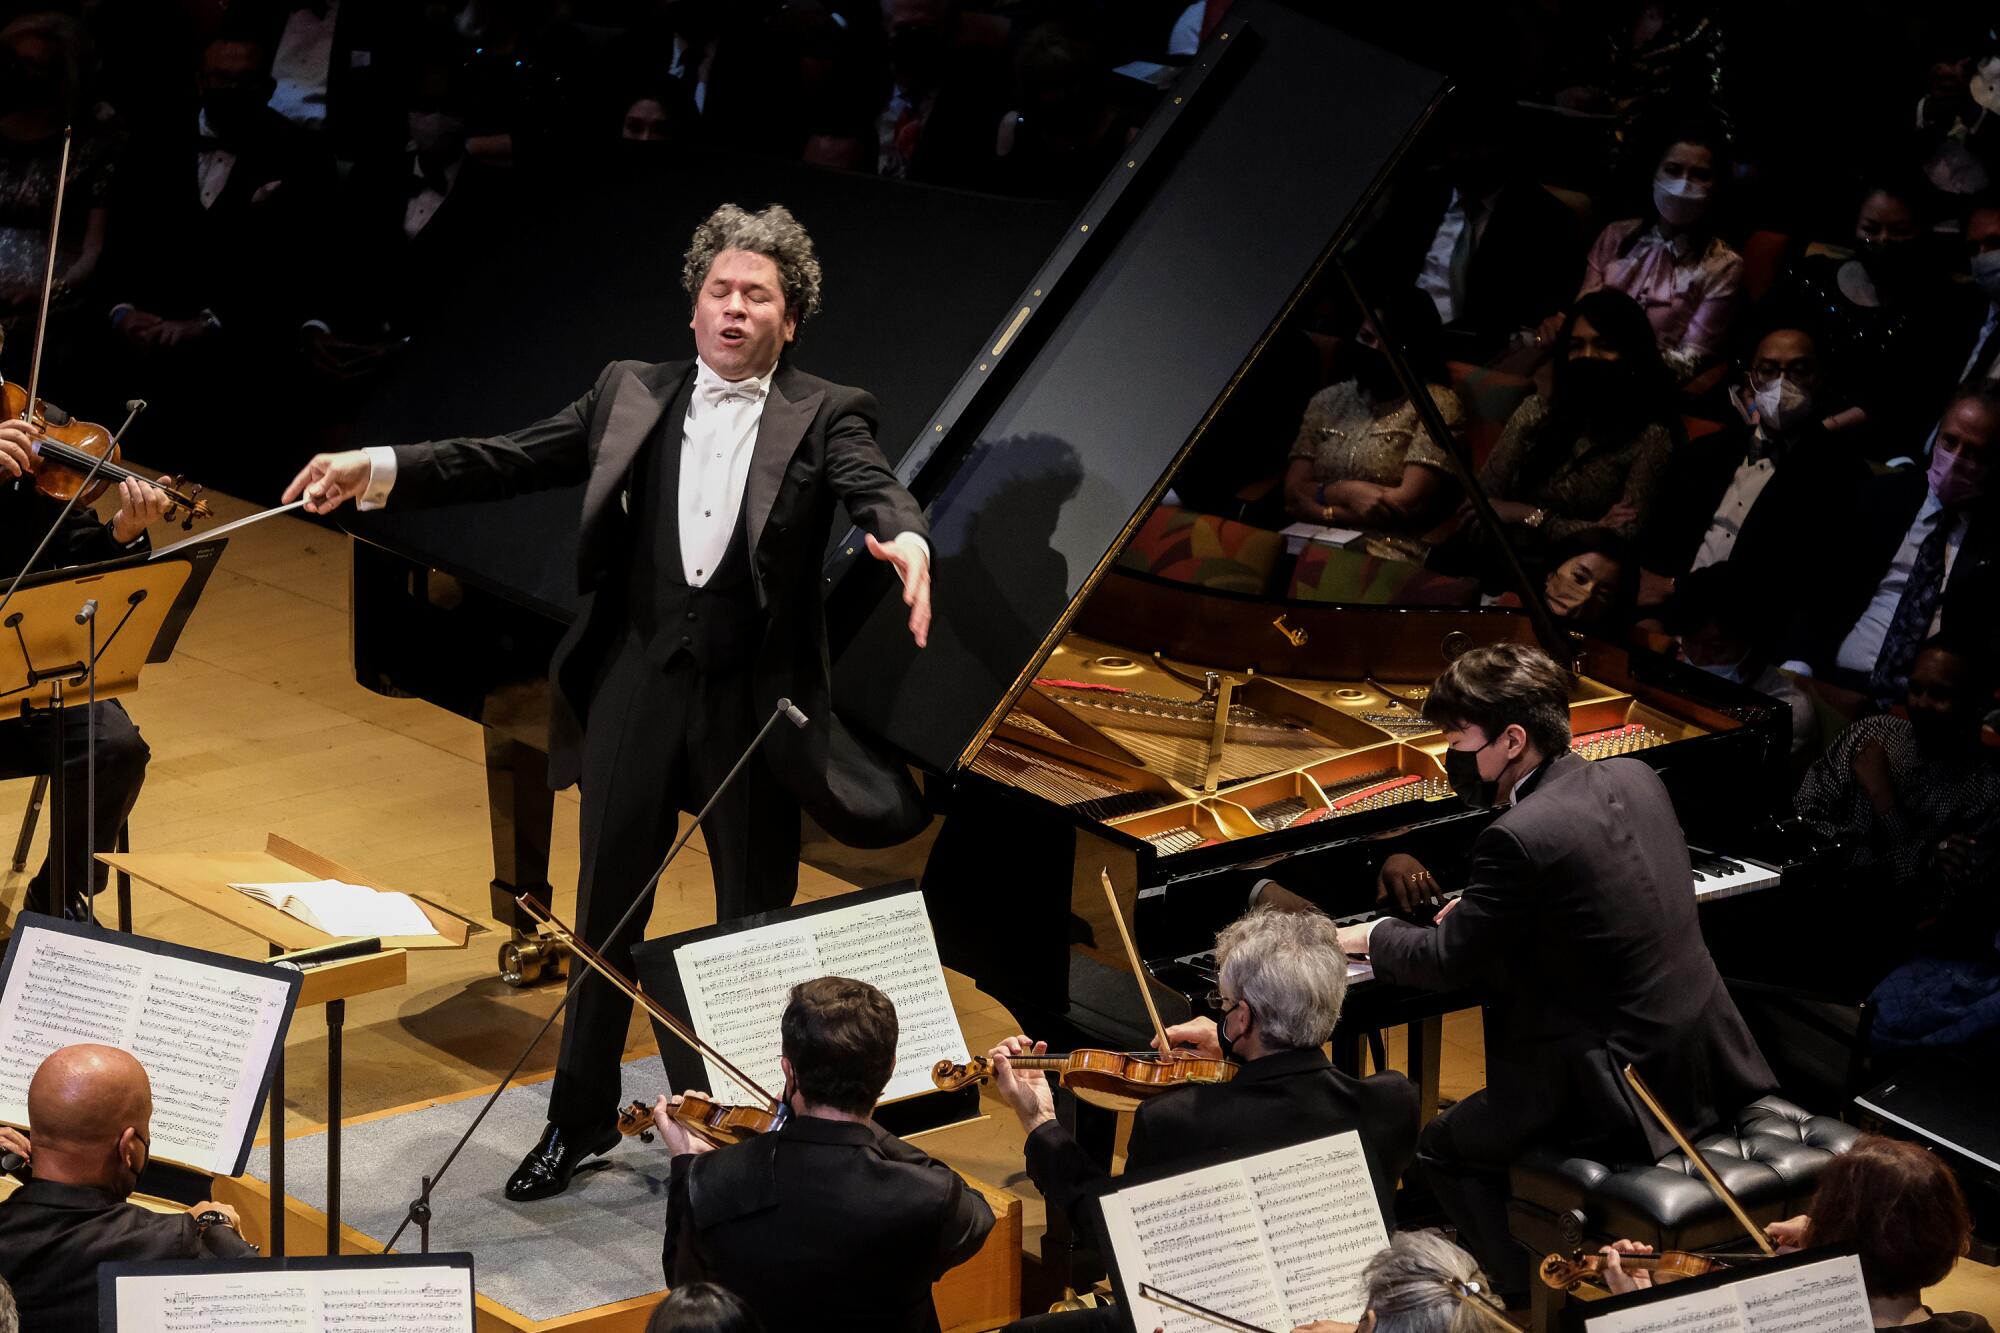 A man enthusiastically conducts an orchestra